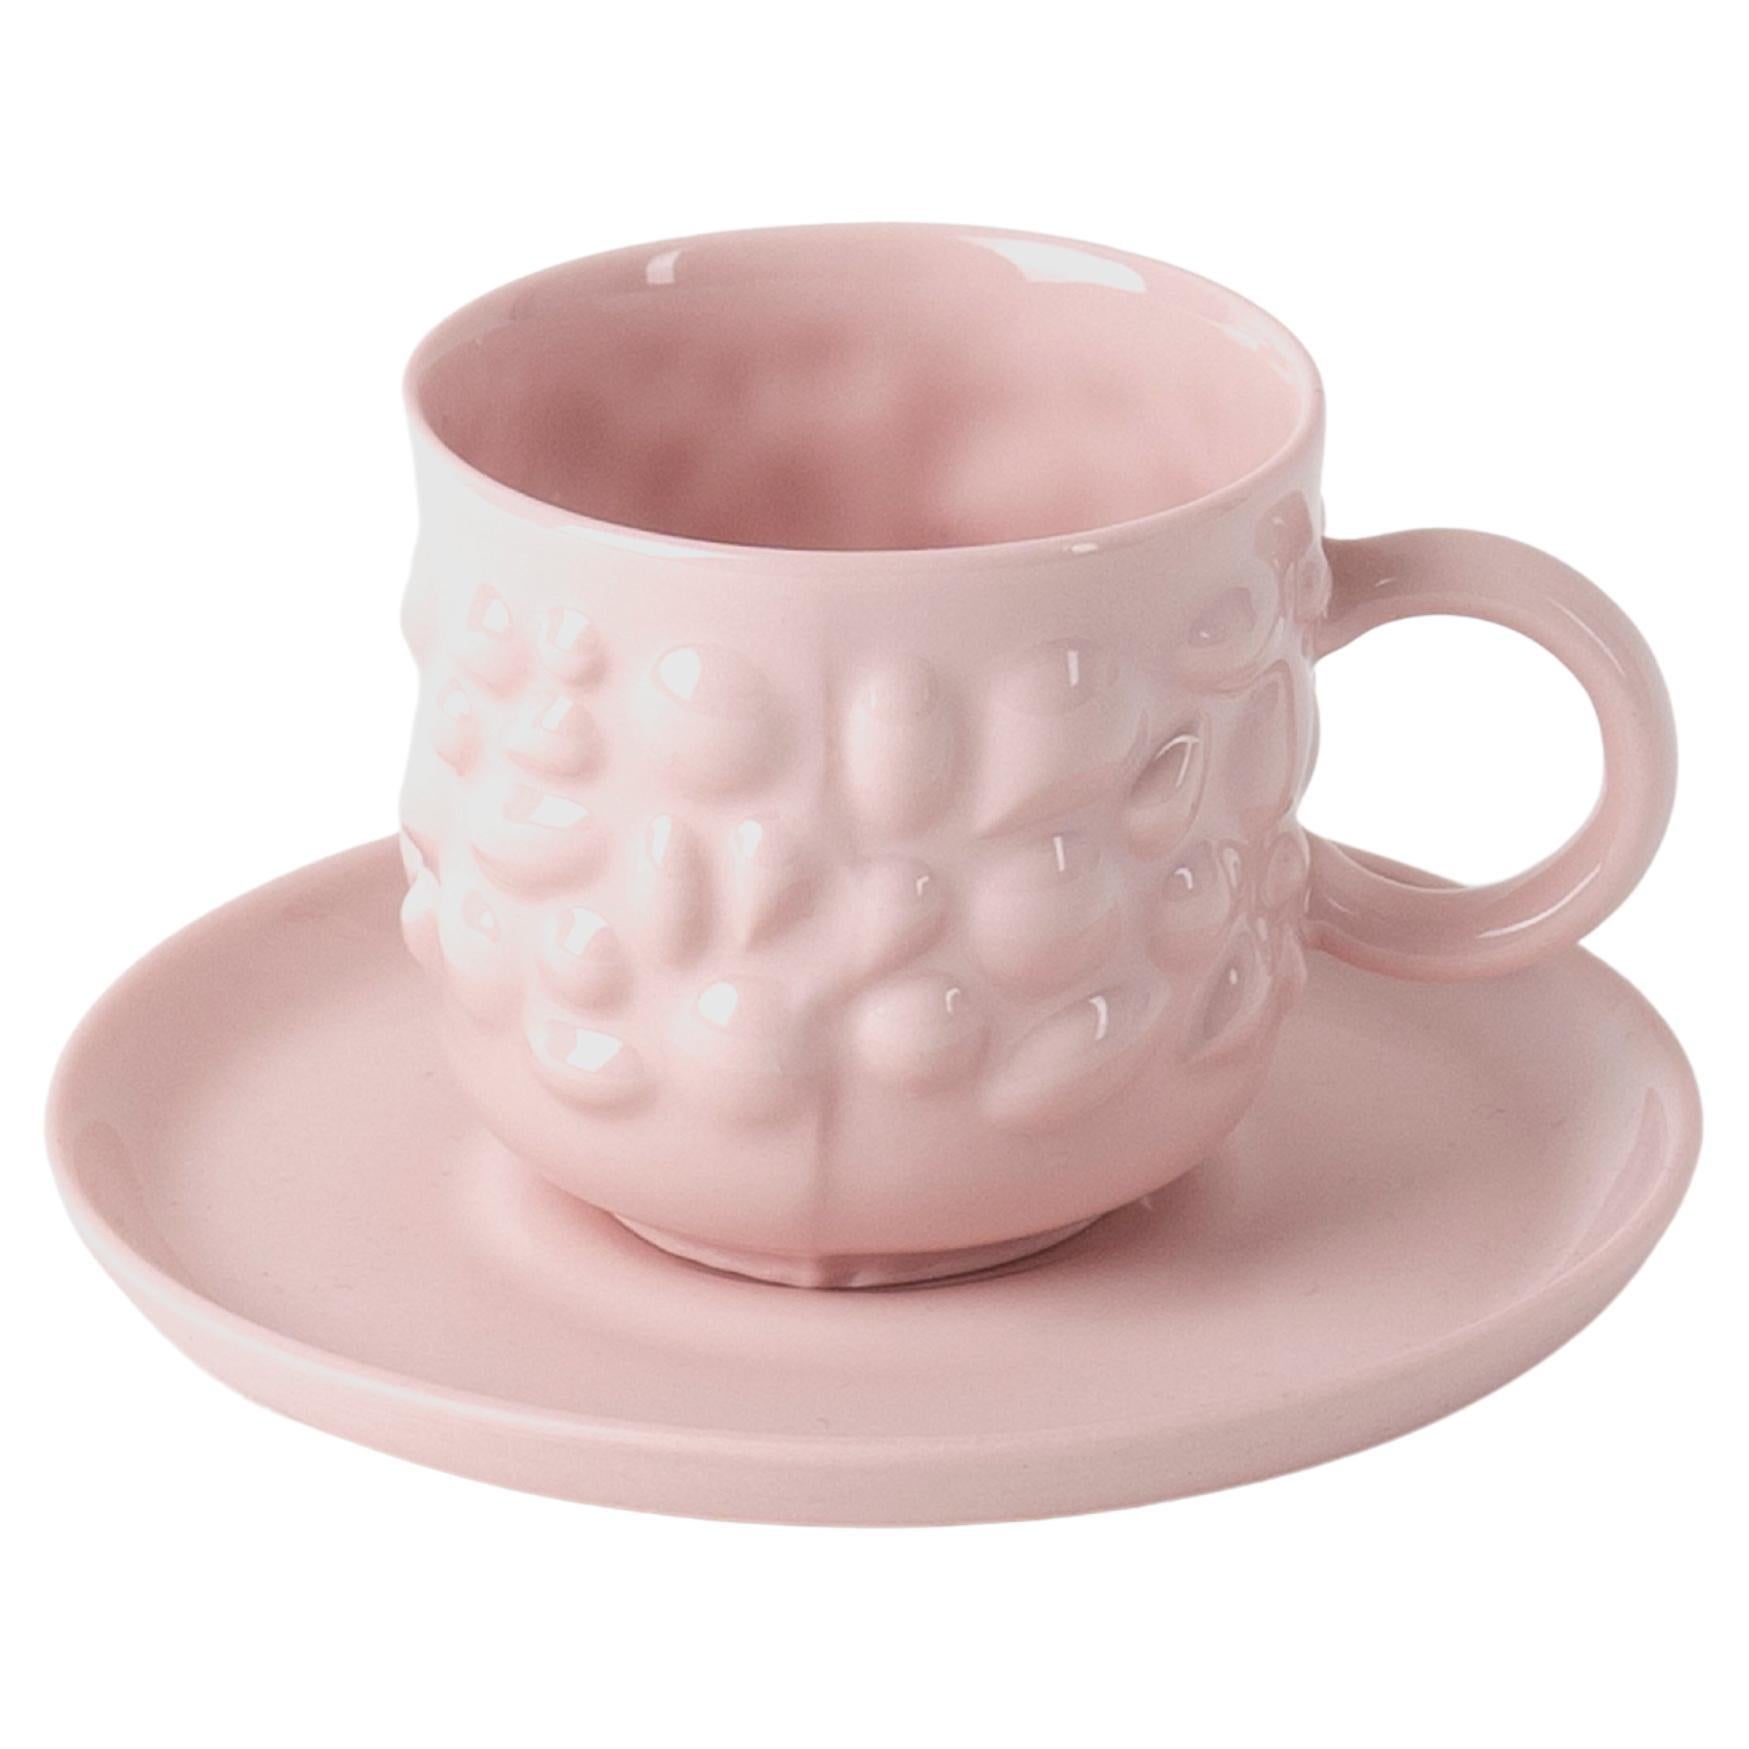 Contemporary Modern, Justine Porcelain Coffee Cup & Saucer 100 ml, Pink For Sale